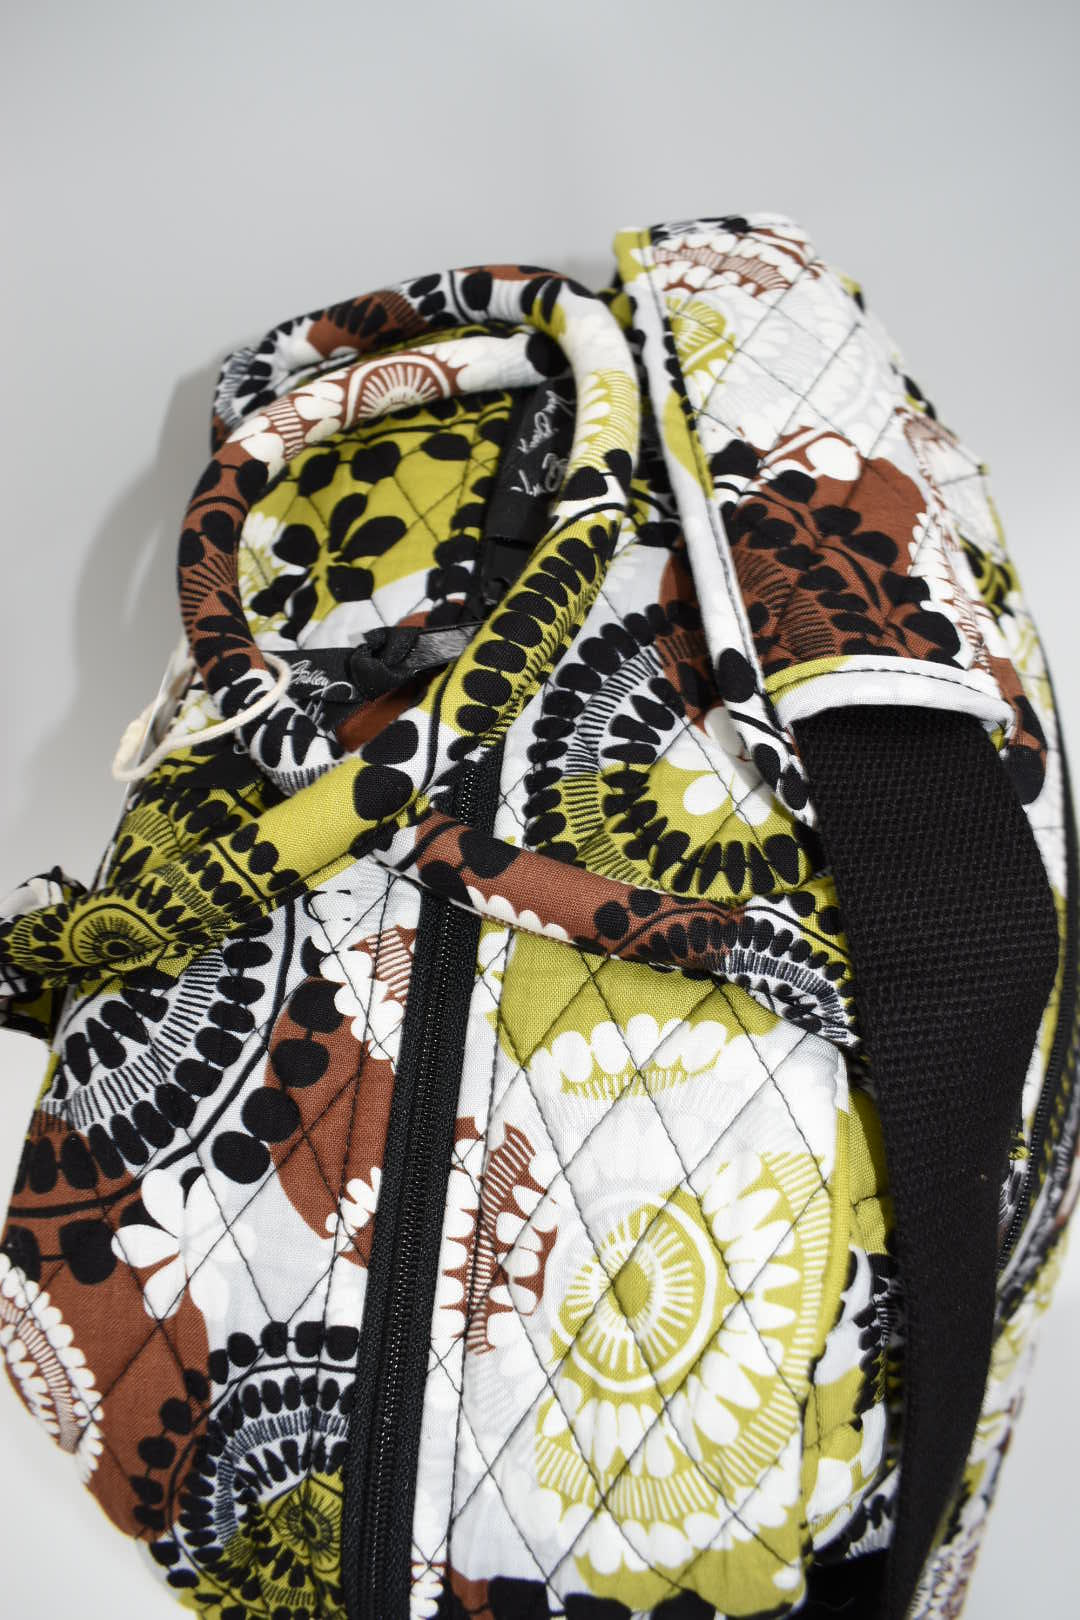 Vera Bradley Large Travel Bag in "Cocoa Moss" Pattern